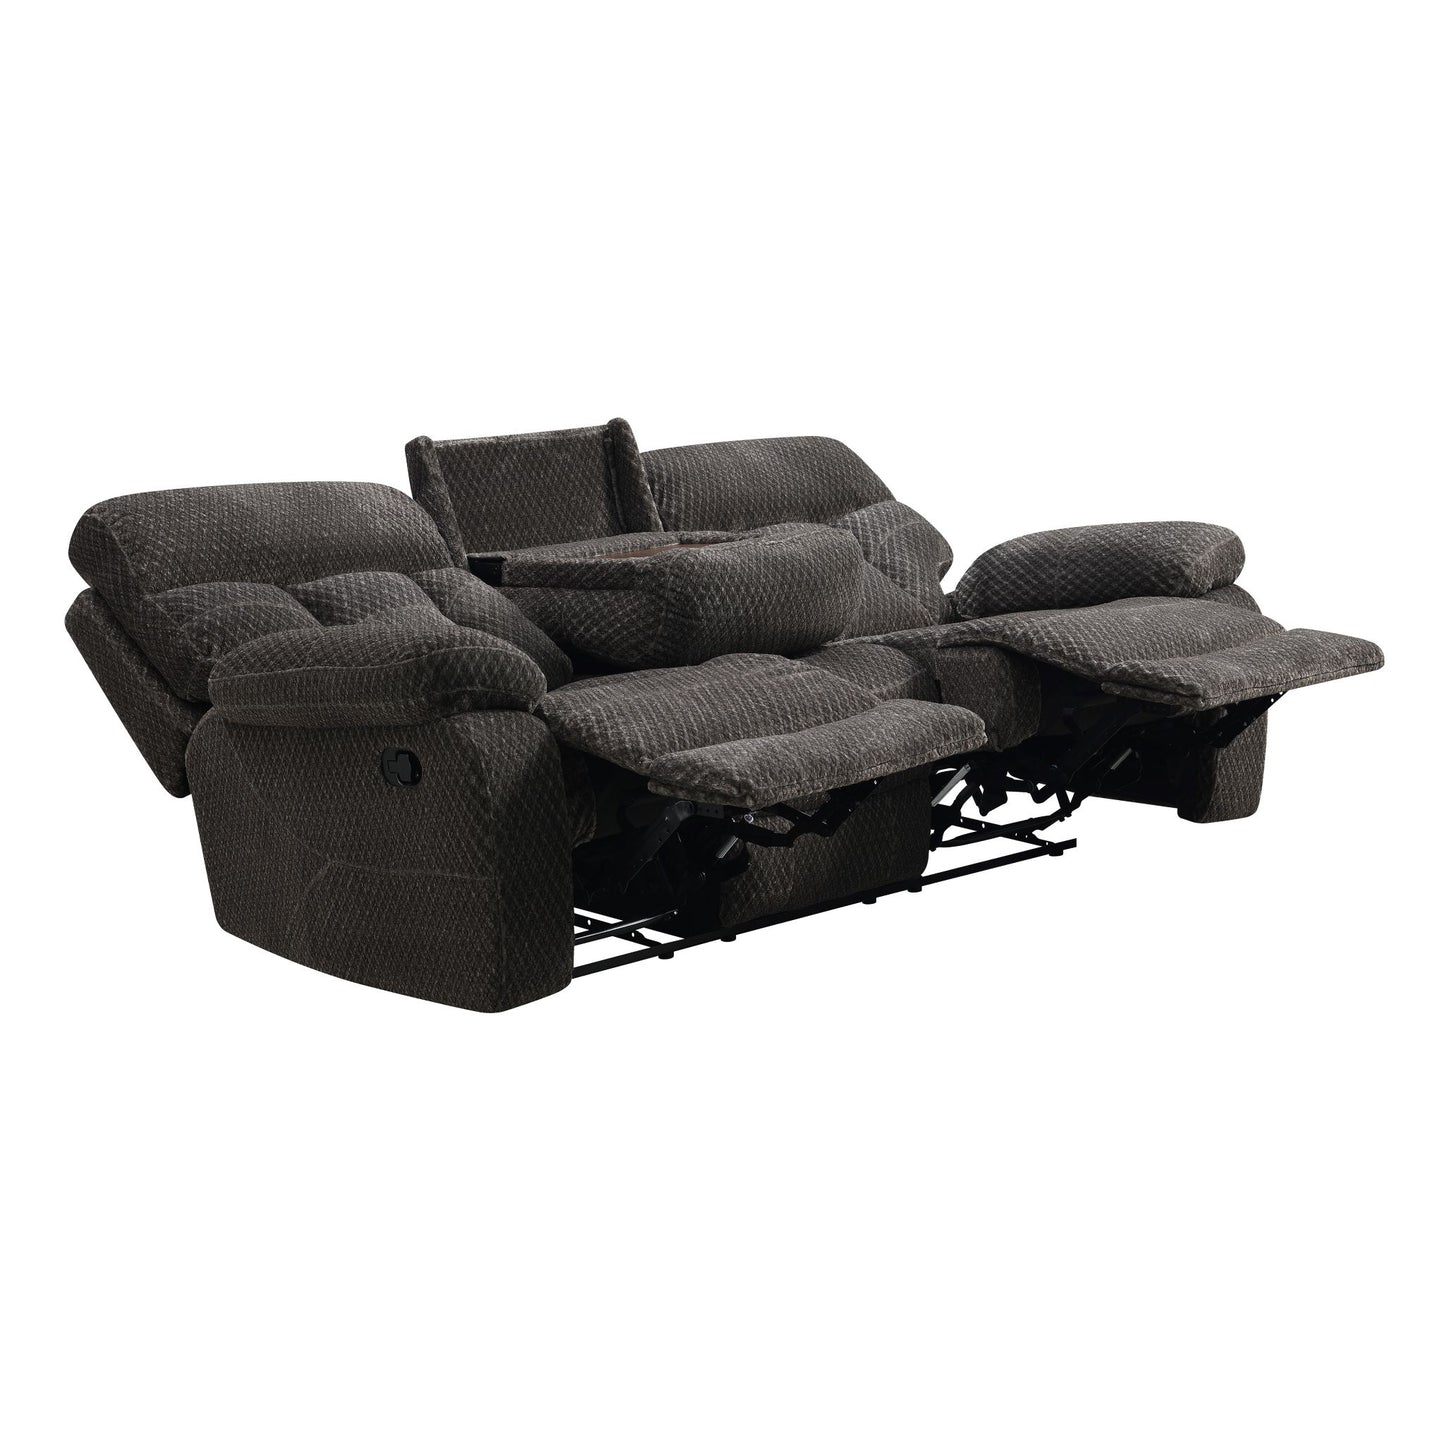 Charcoal and Graphite Reclining Sofa and Loveseat